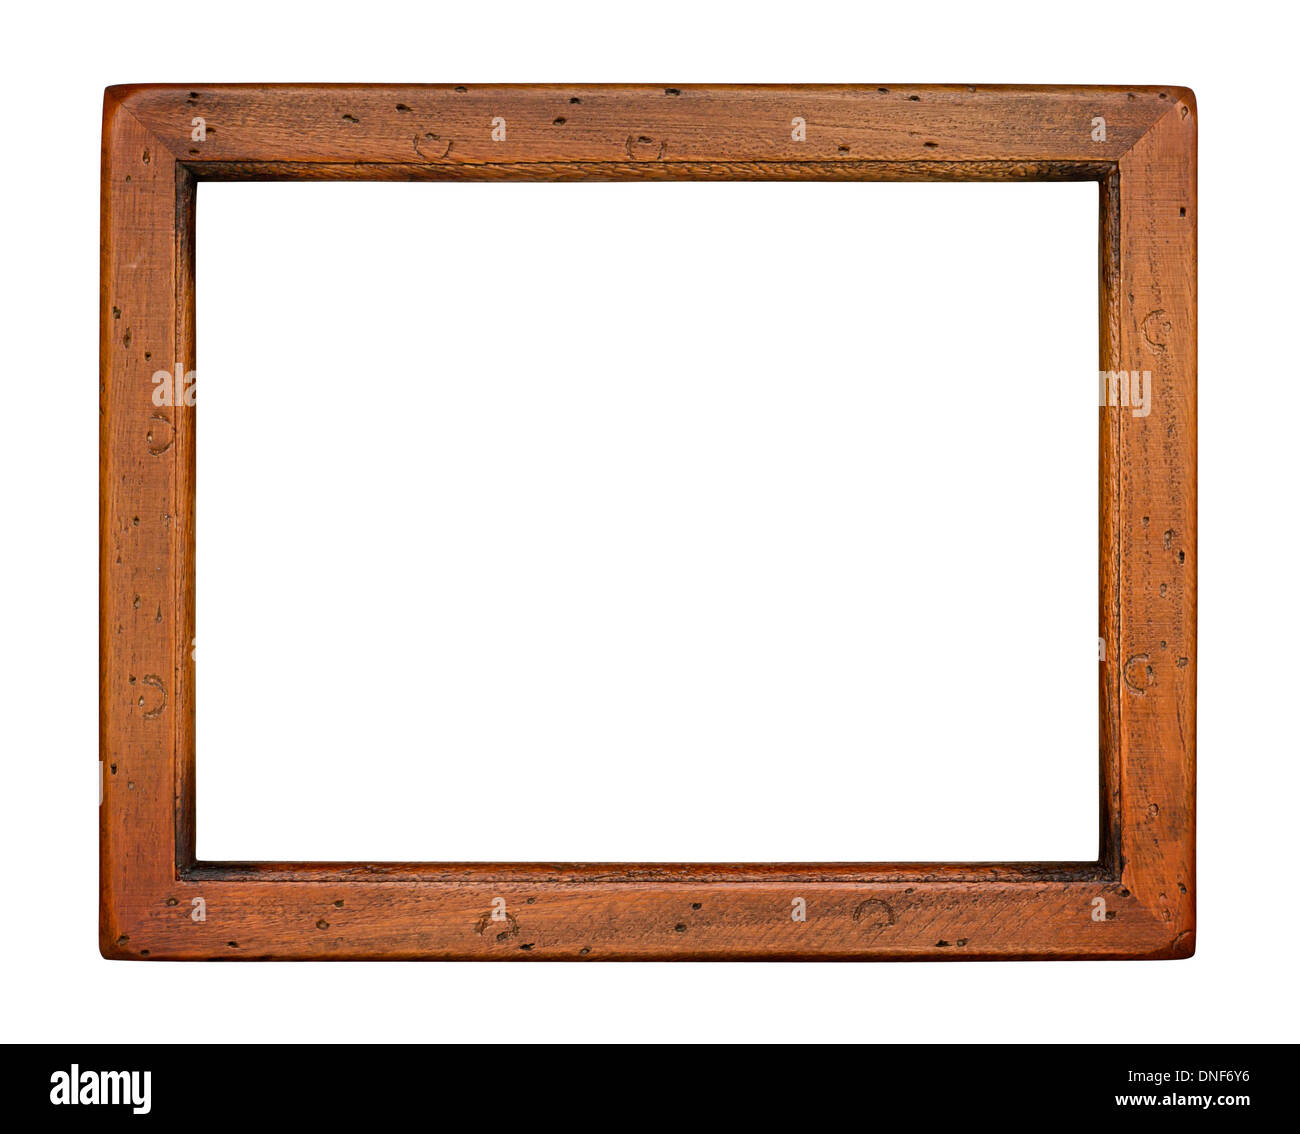 Flat plain wooden picture frame isolated on a white background Stock Photo